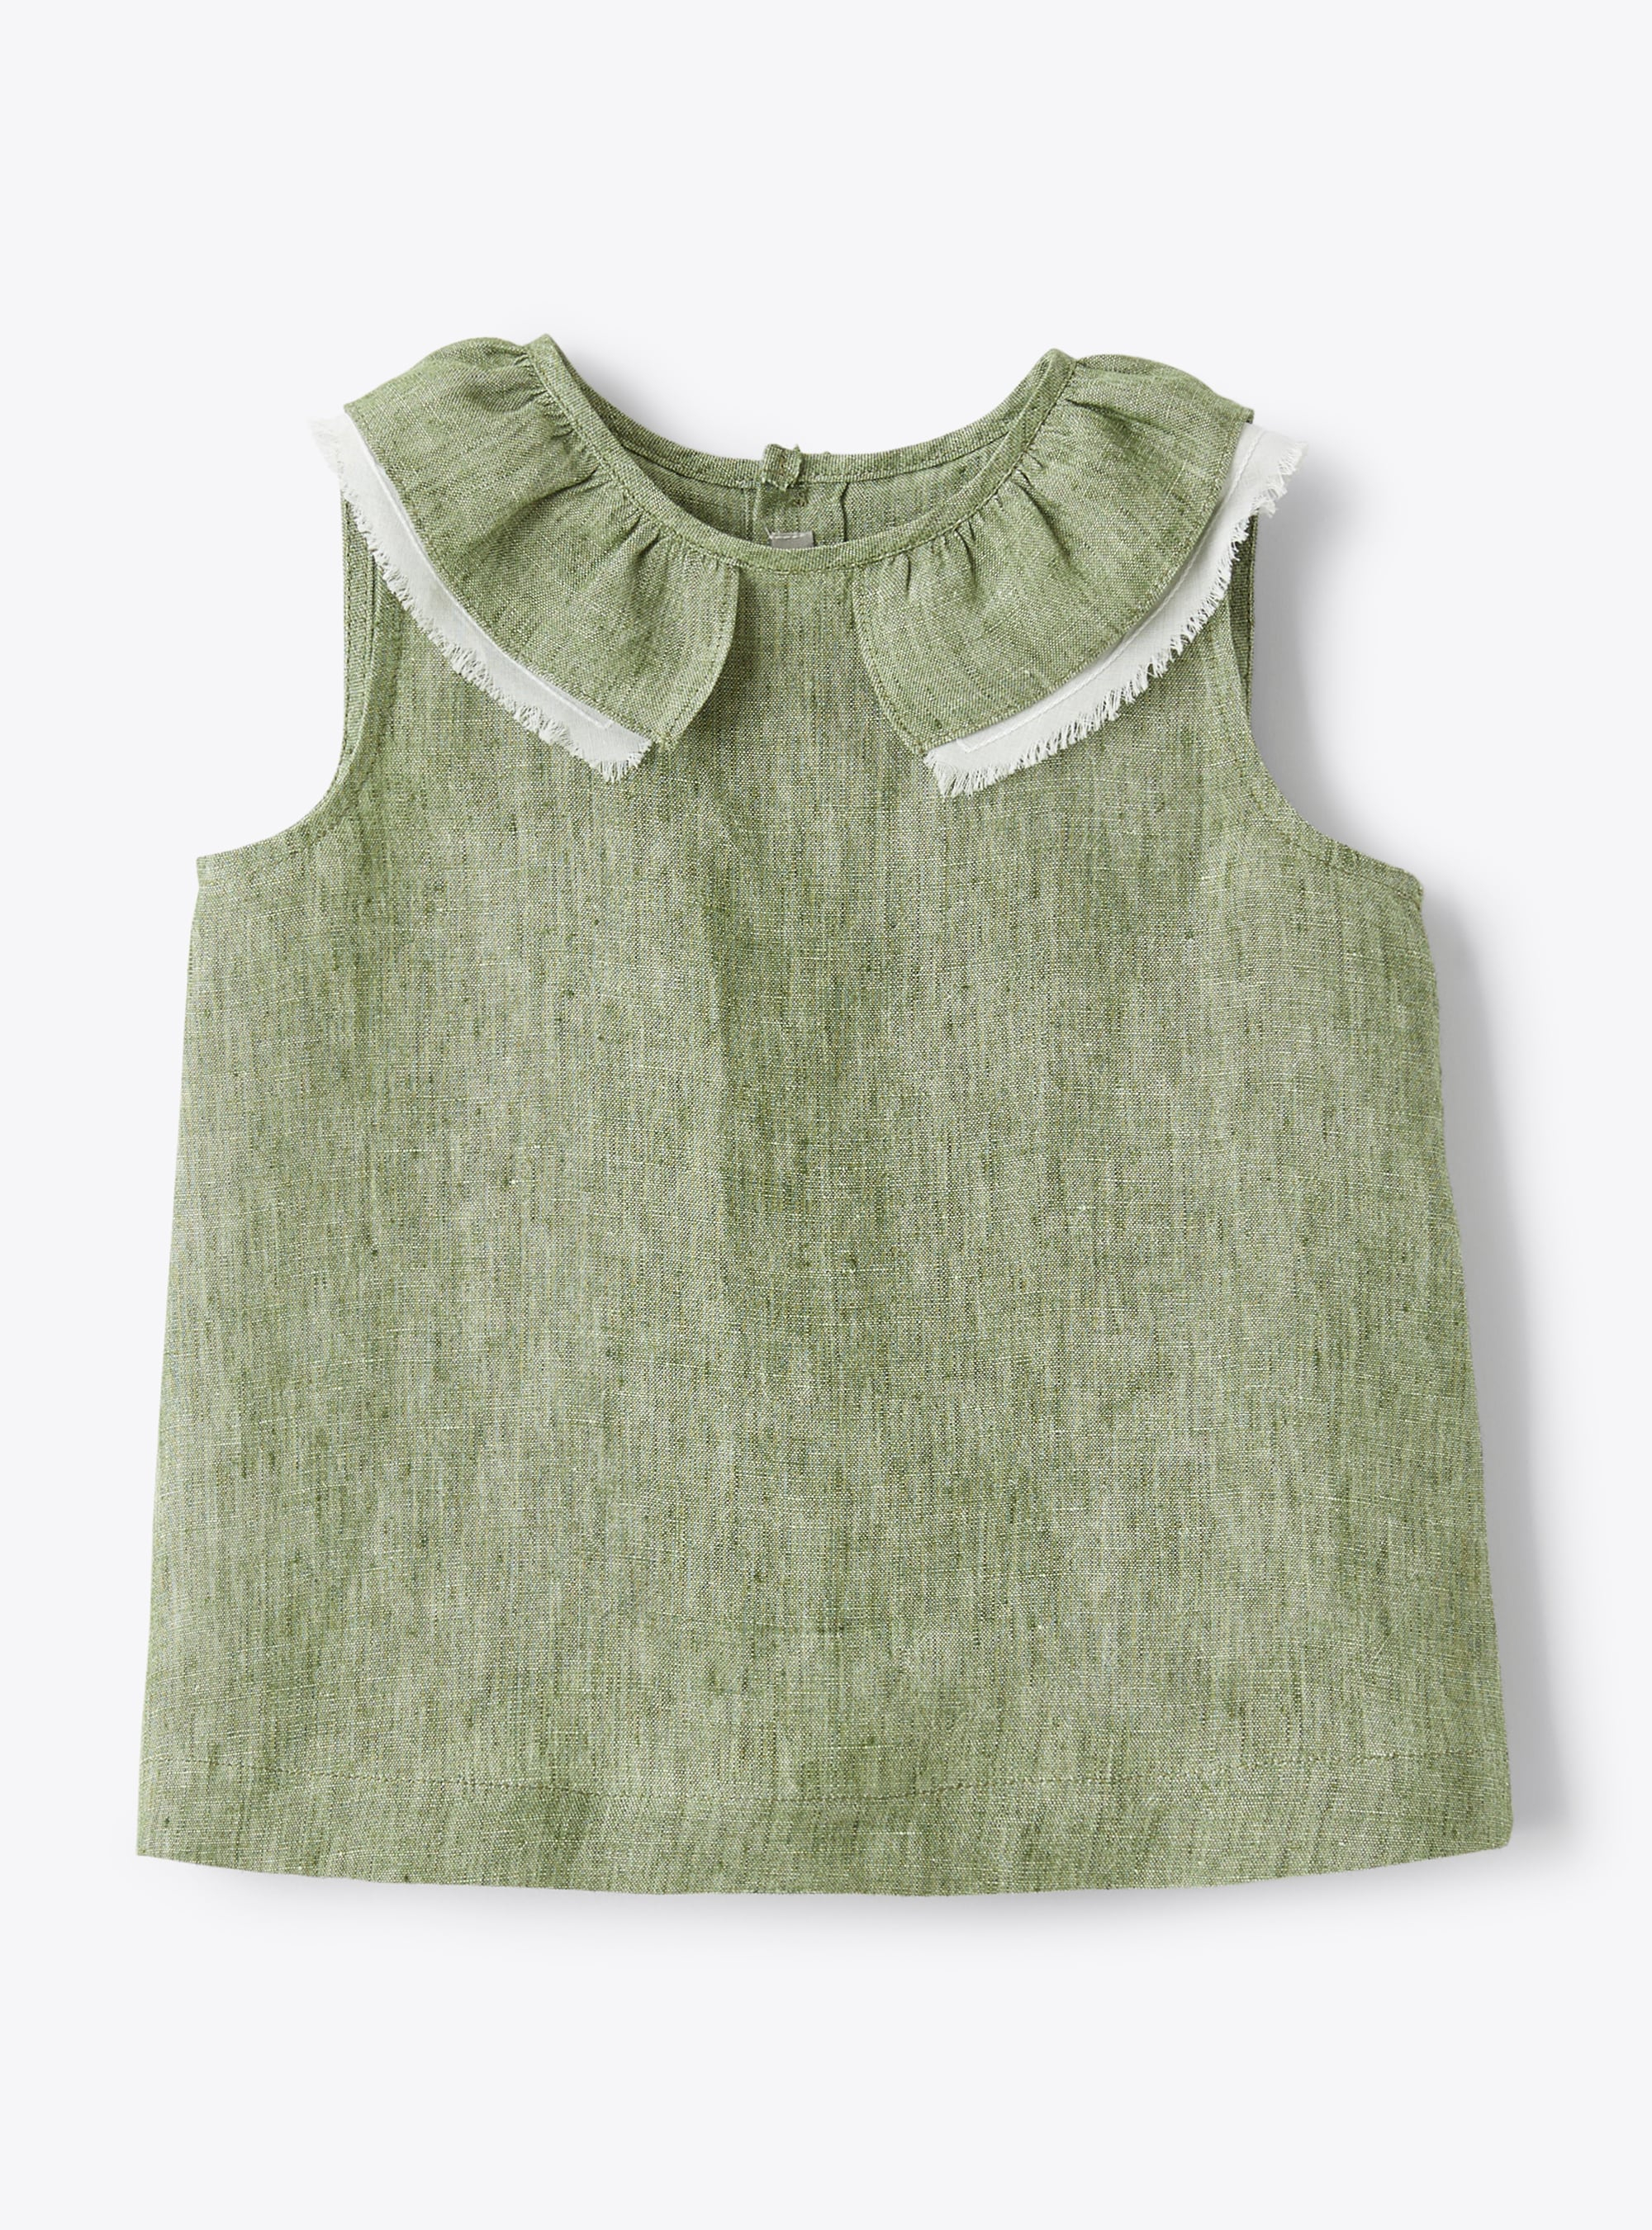 Top in sage-green mélange linen - Green | Il Gufo